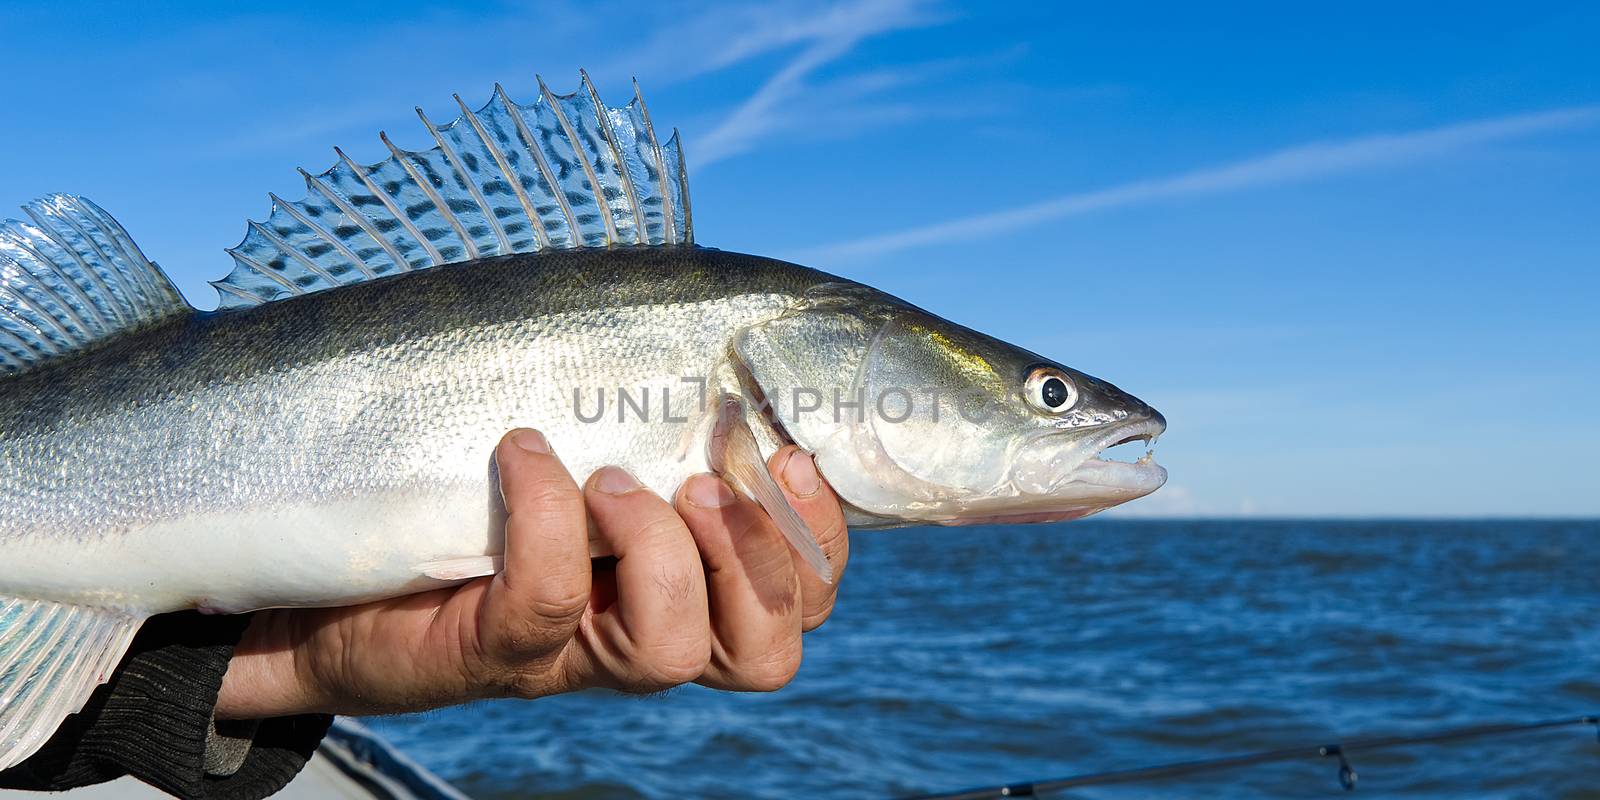 Fisherman holds a caught zander or pike perch in hands against the background of the Baltic sea. Fishing catch and release concept. Zander on freedom